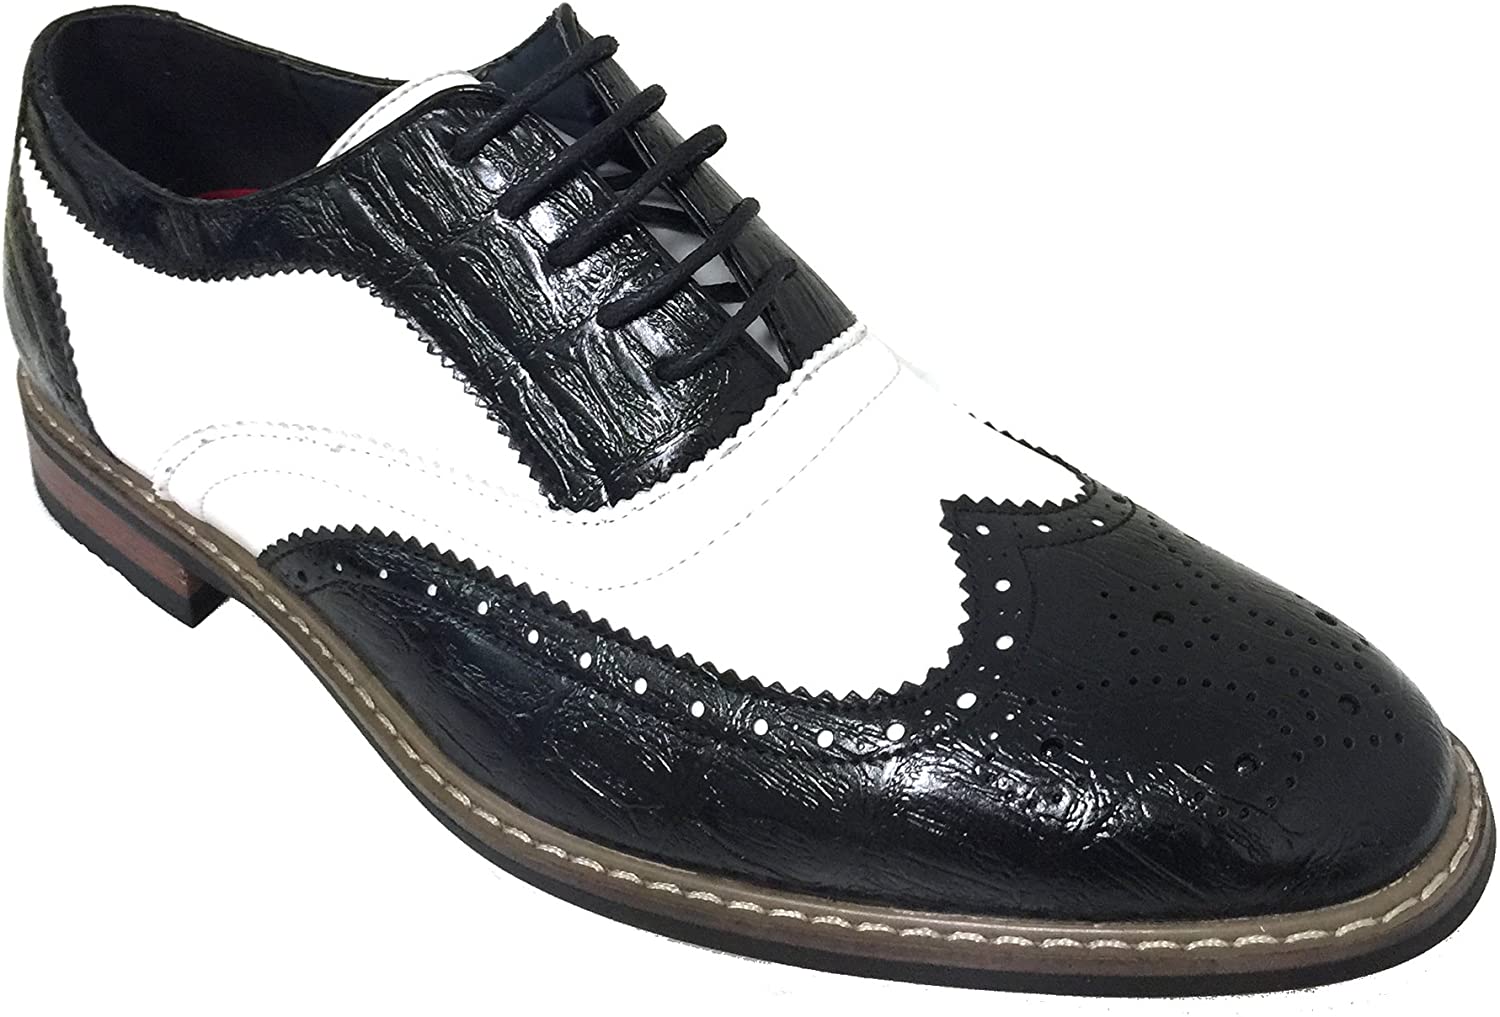 Men's Dress Shoes Wingtip Lace Up Brogue Oxfords Casual - image 1 of 5